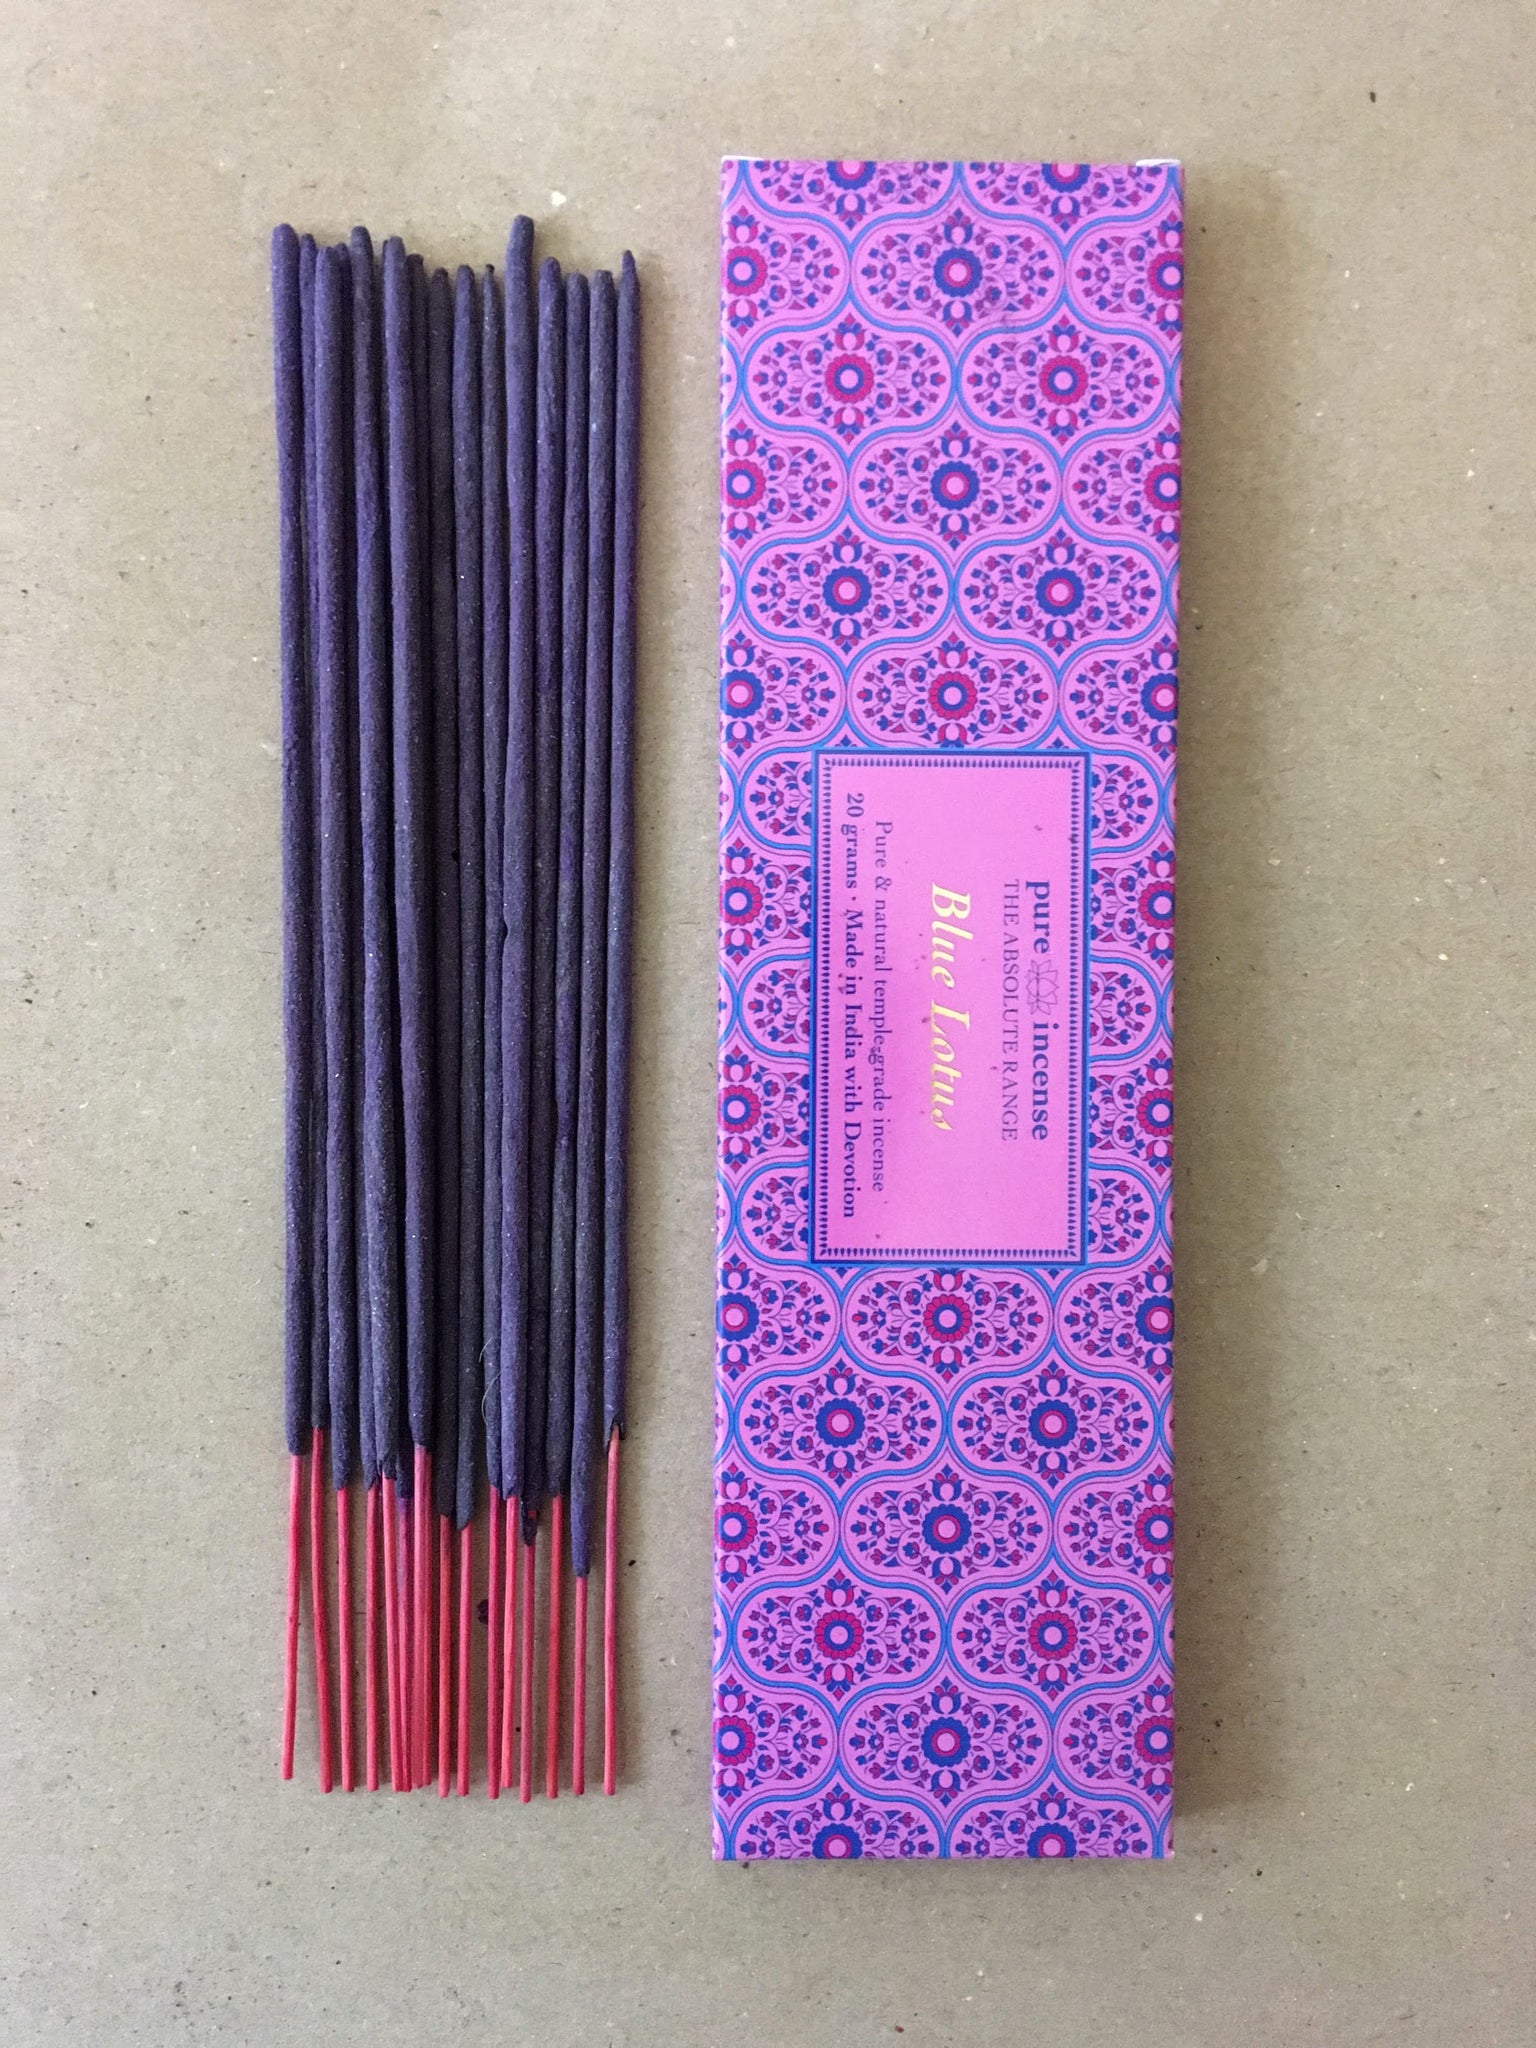 Blue Lotus | Absolute 20gm by Pure Incense